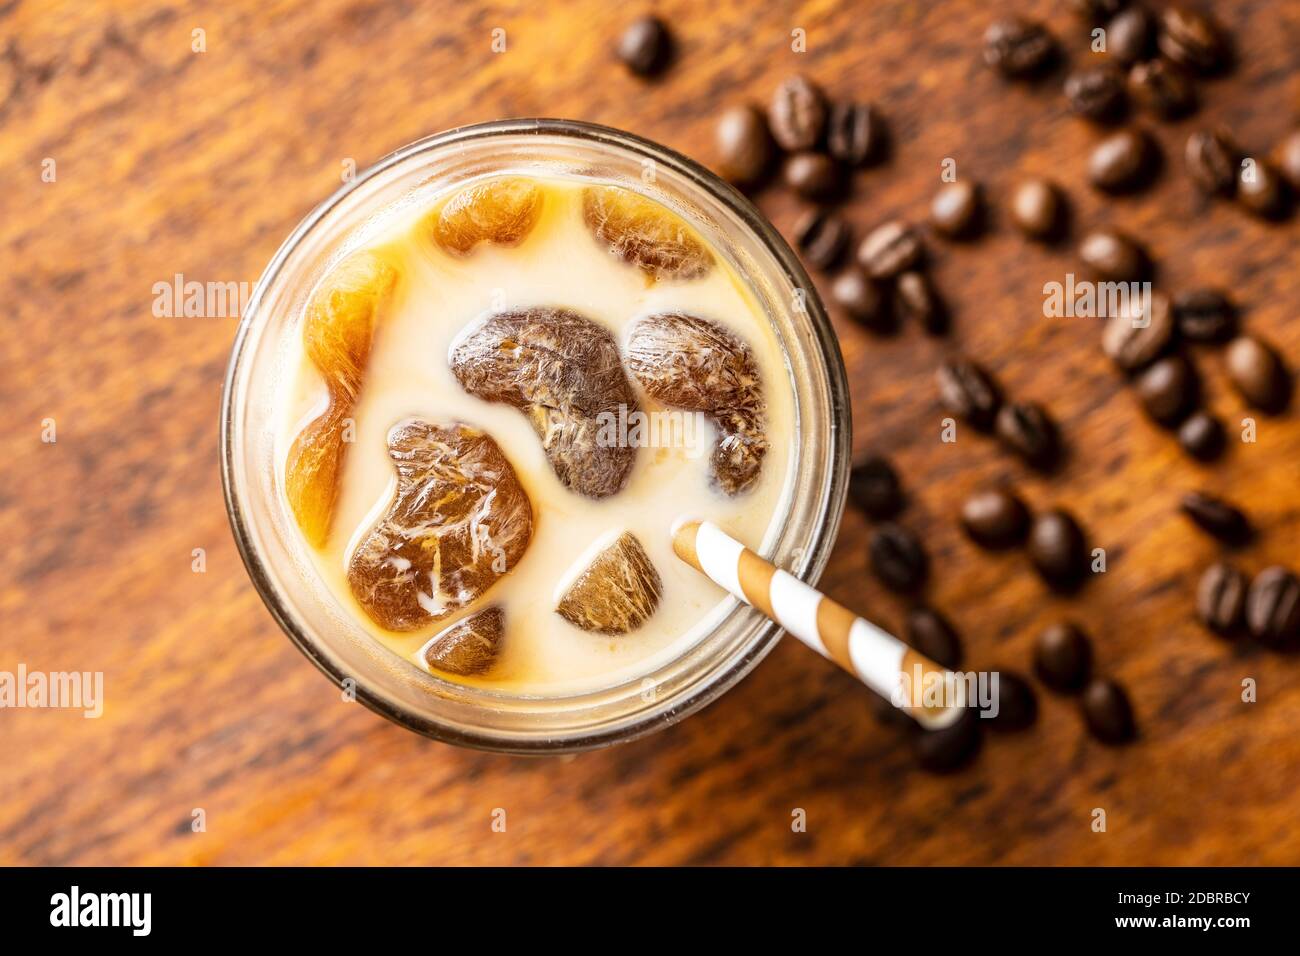 https://c8.alamy.com/comp/2DBRBCY/iced-coffee-with-coffee-ice-cubes-on-wooden-table-top-view-2DBRBCY.jpg